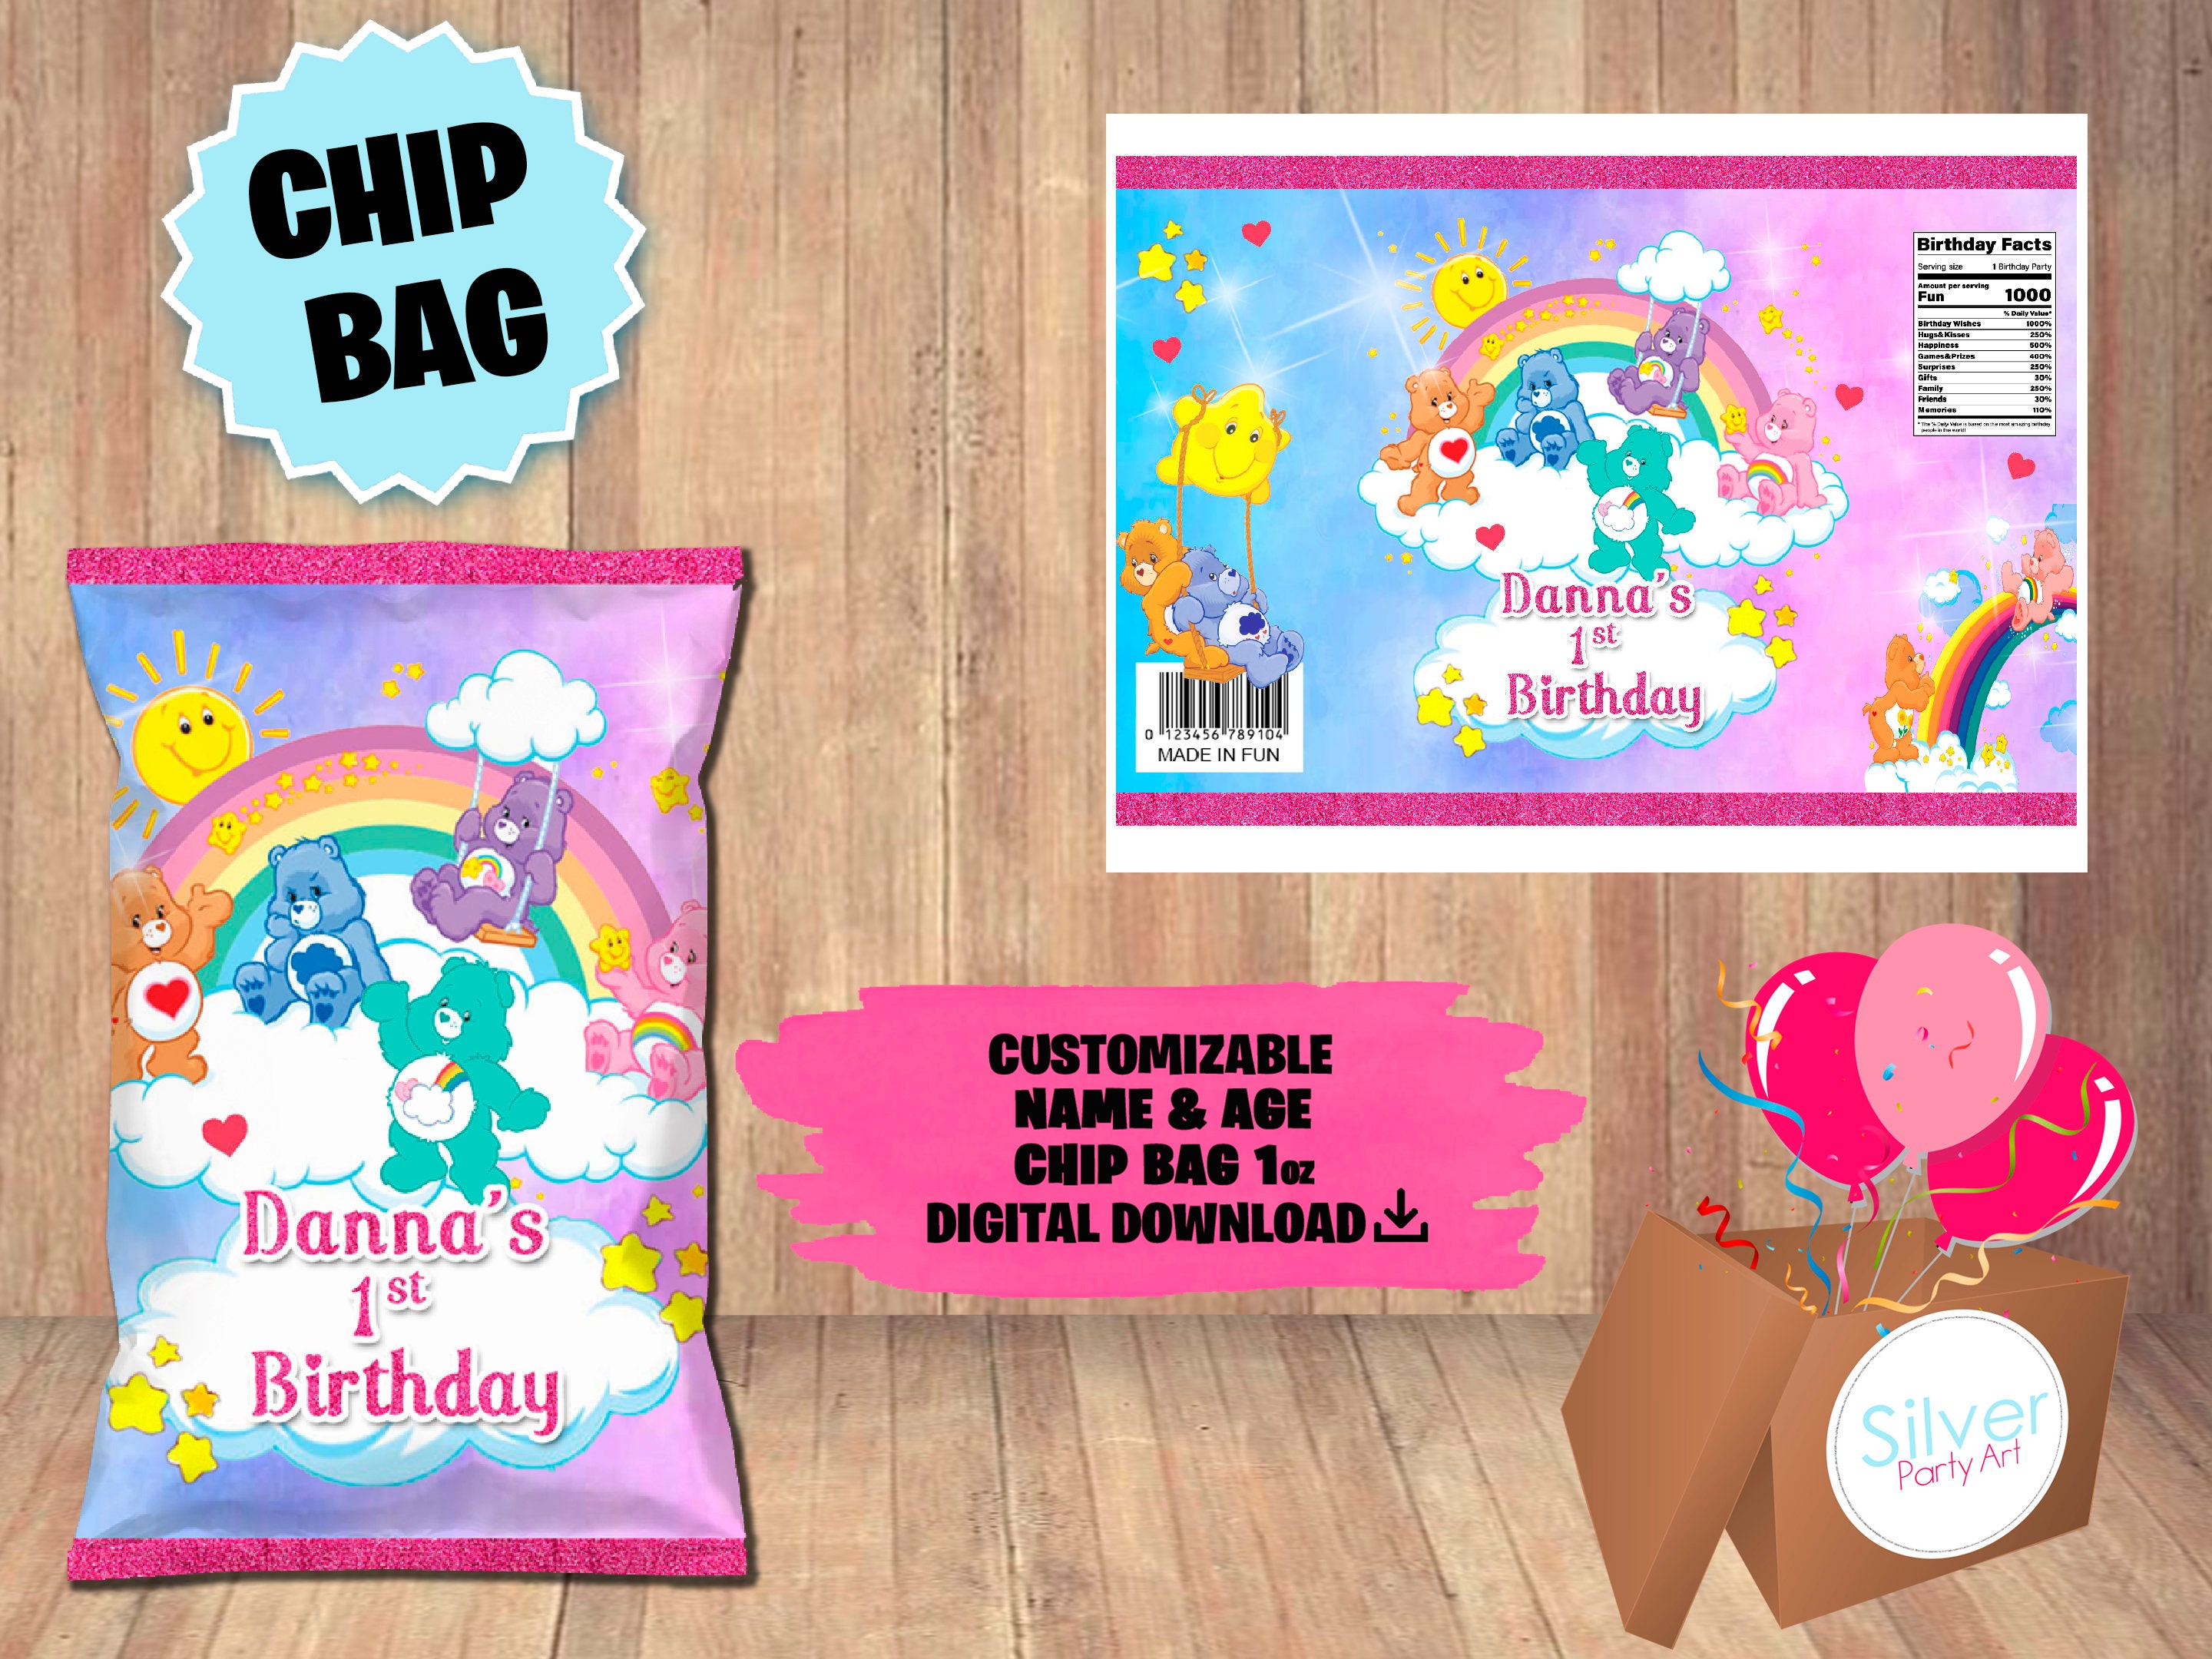 Labels For Care Bears Party - Chip Bag Label - DIGITAL DOWNLOAD - Carebears  Printable - Birthday Supplies